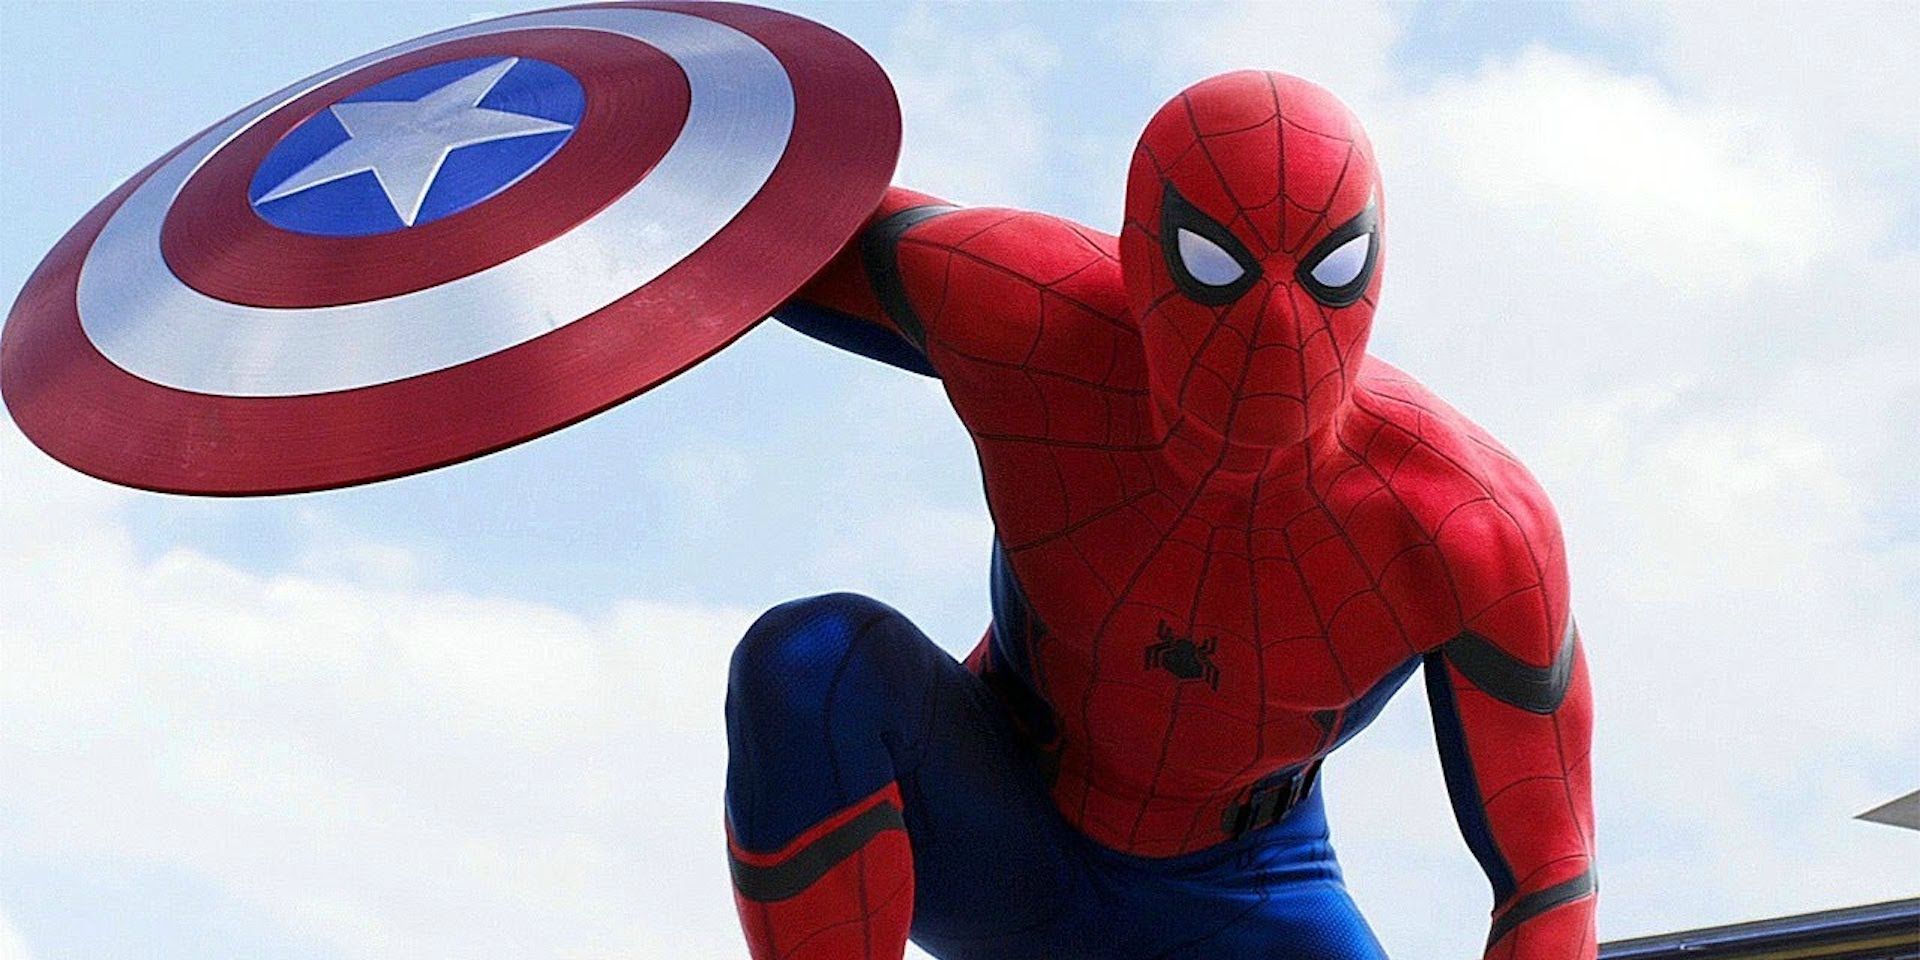 Tom-Holland-as-Spider-Man-with-Shield-in-Captain-America-Civil-War